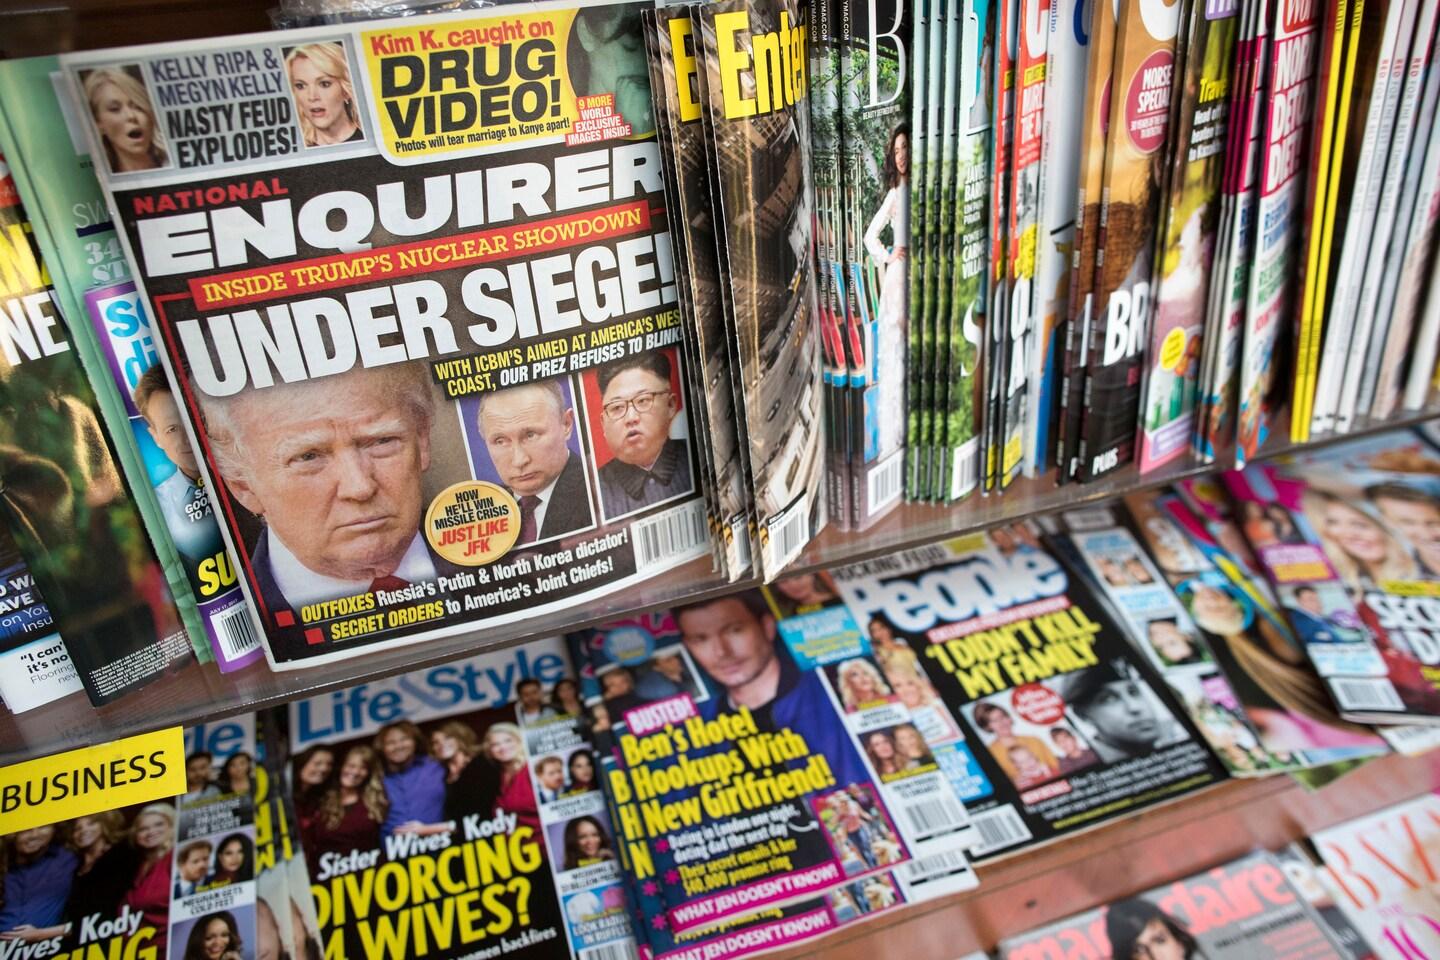 After a long search, scandal-plagued National Enquirer finds a buyer